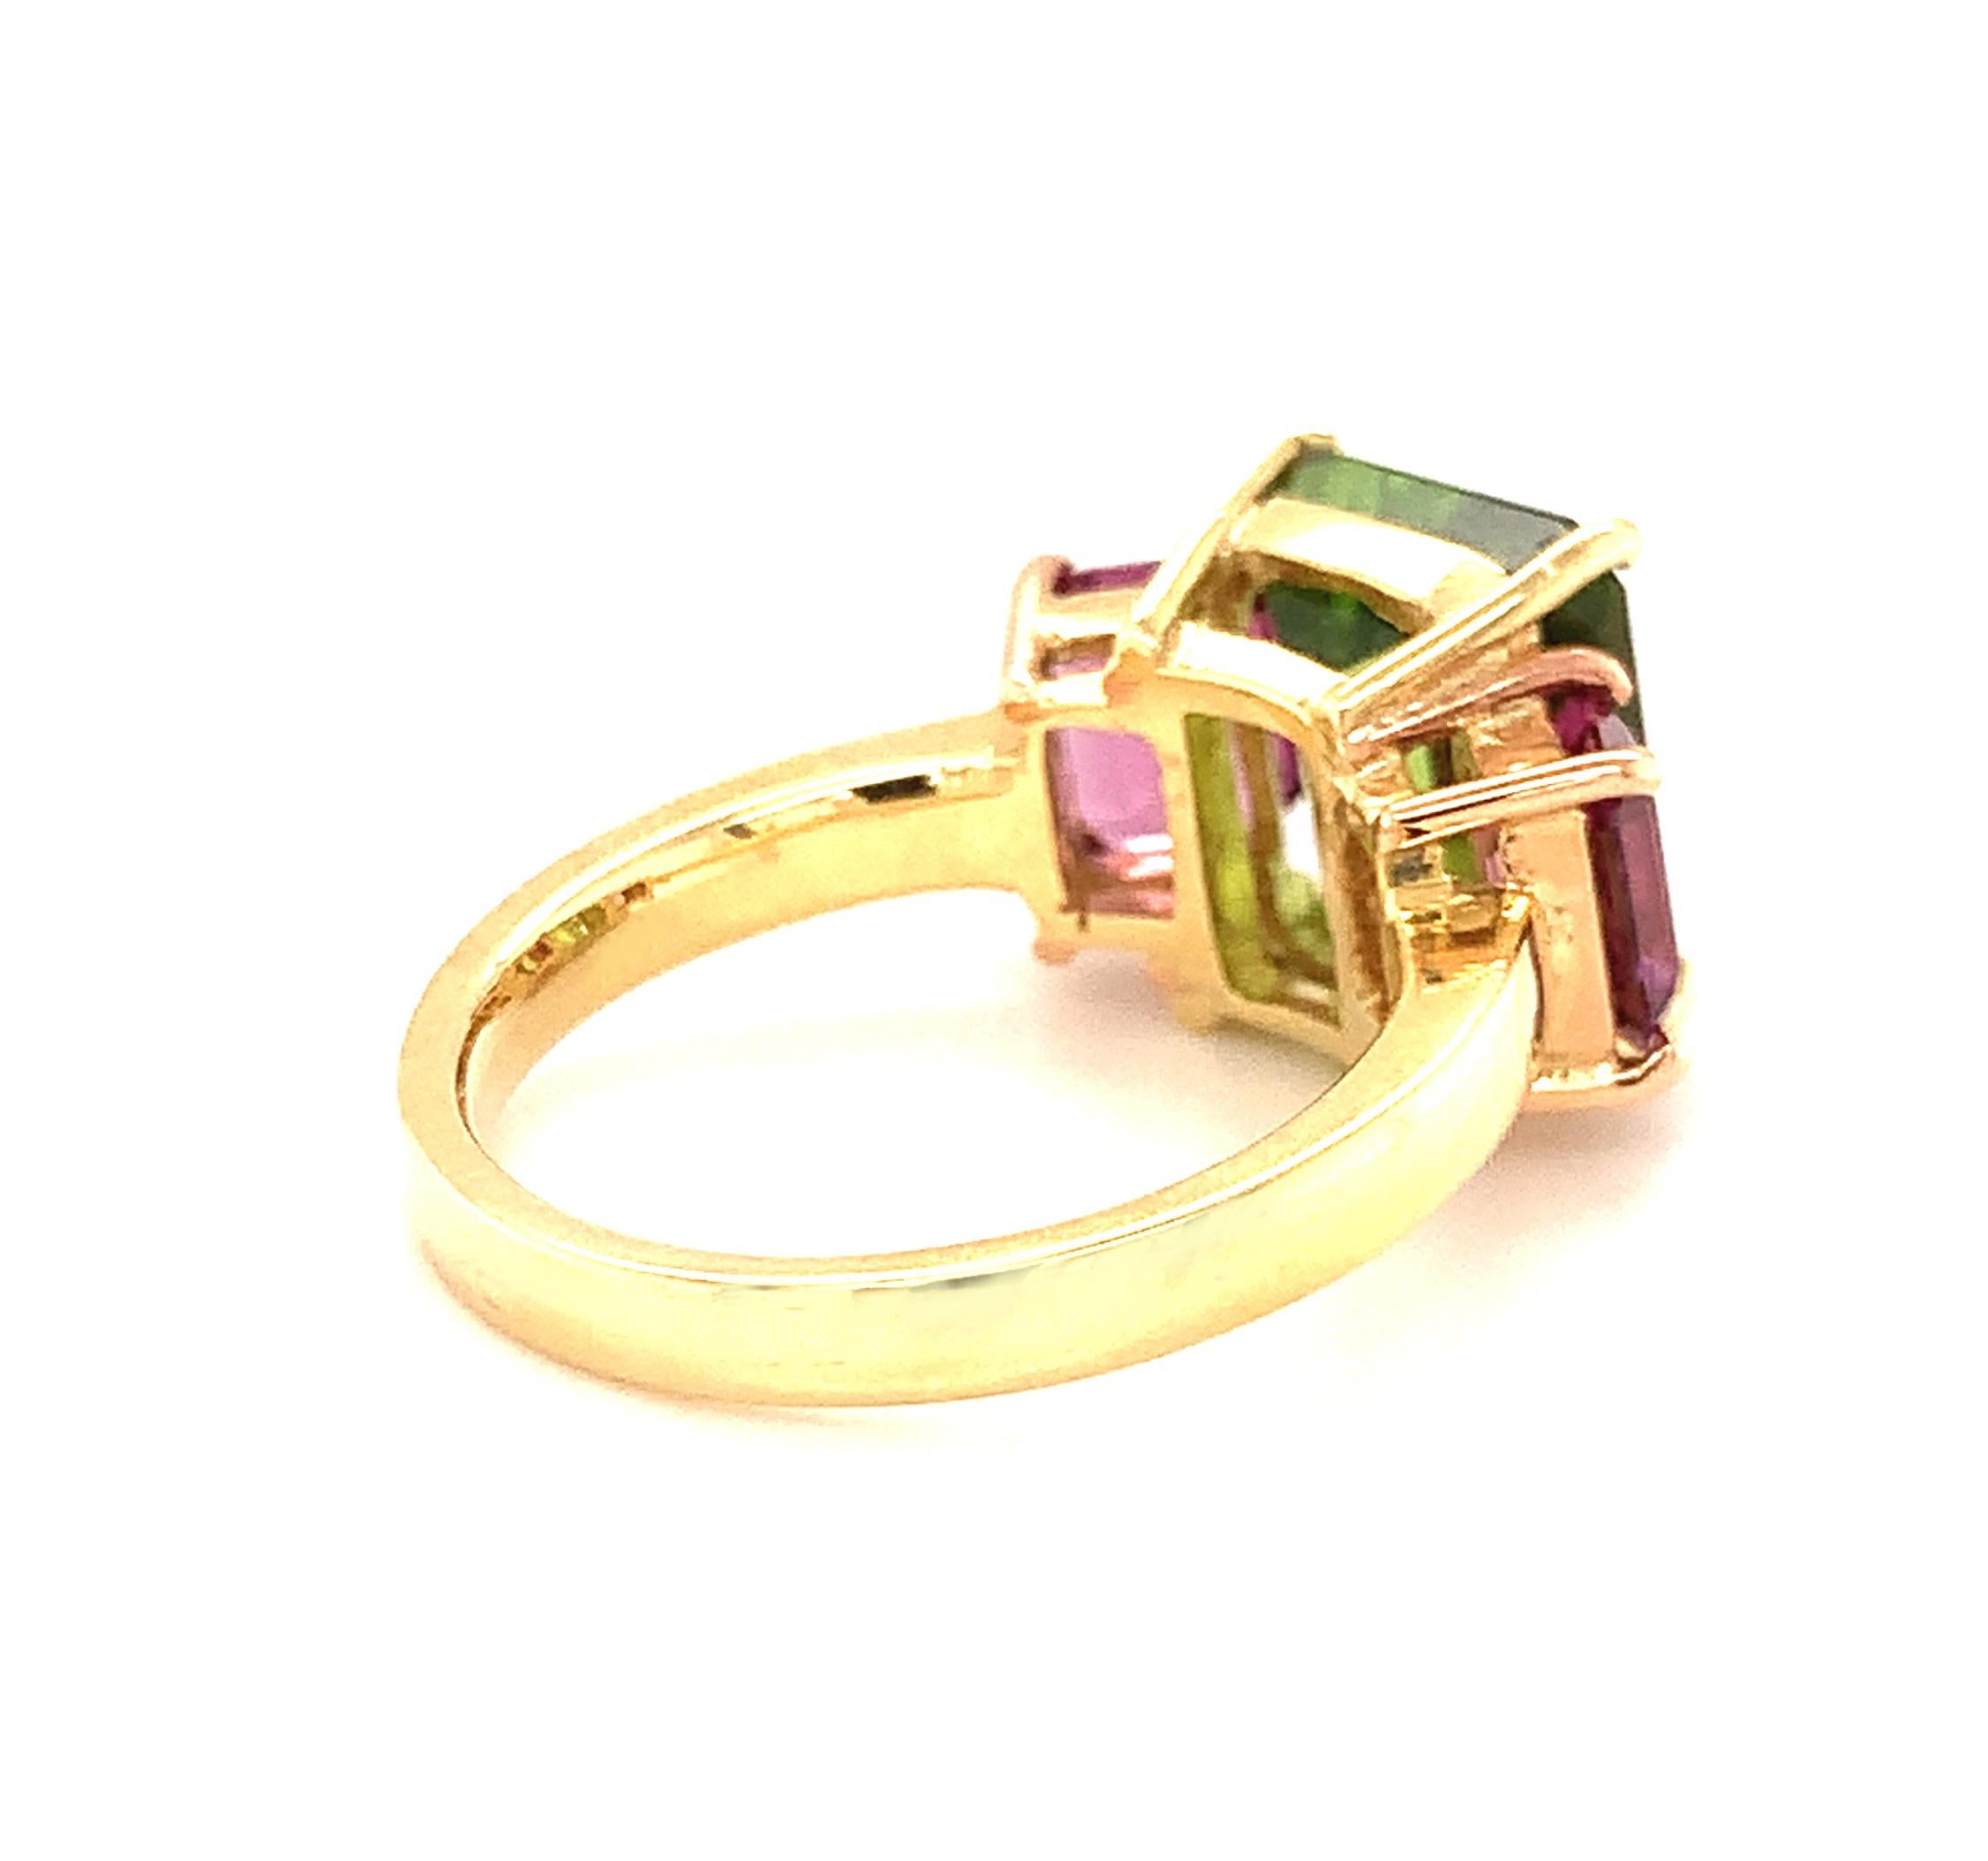 5.49 Carat Peridot and Rhodolite Garnet Three-Stone Ring in Yellow and Rose Gold In New Condition For Sale In Los Angeles, CA